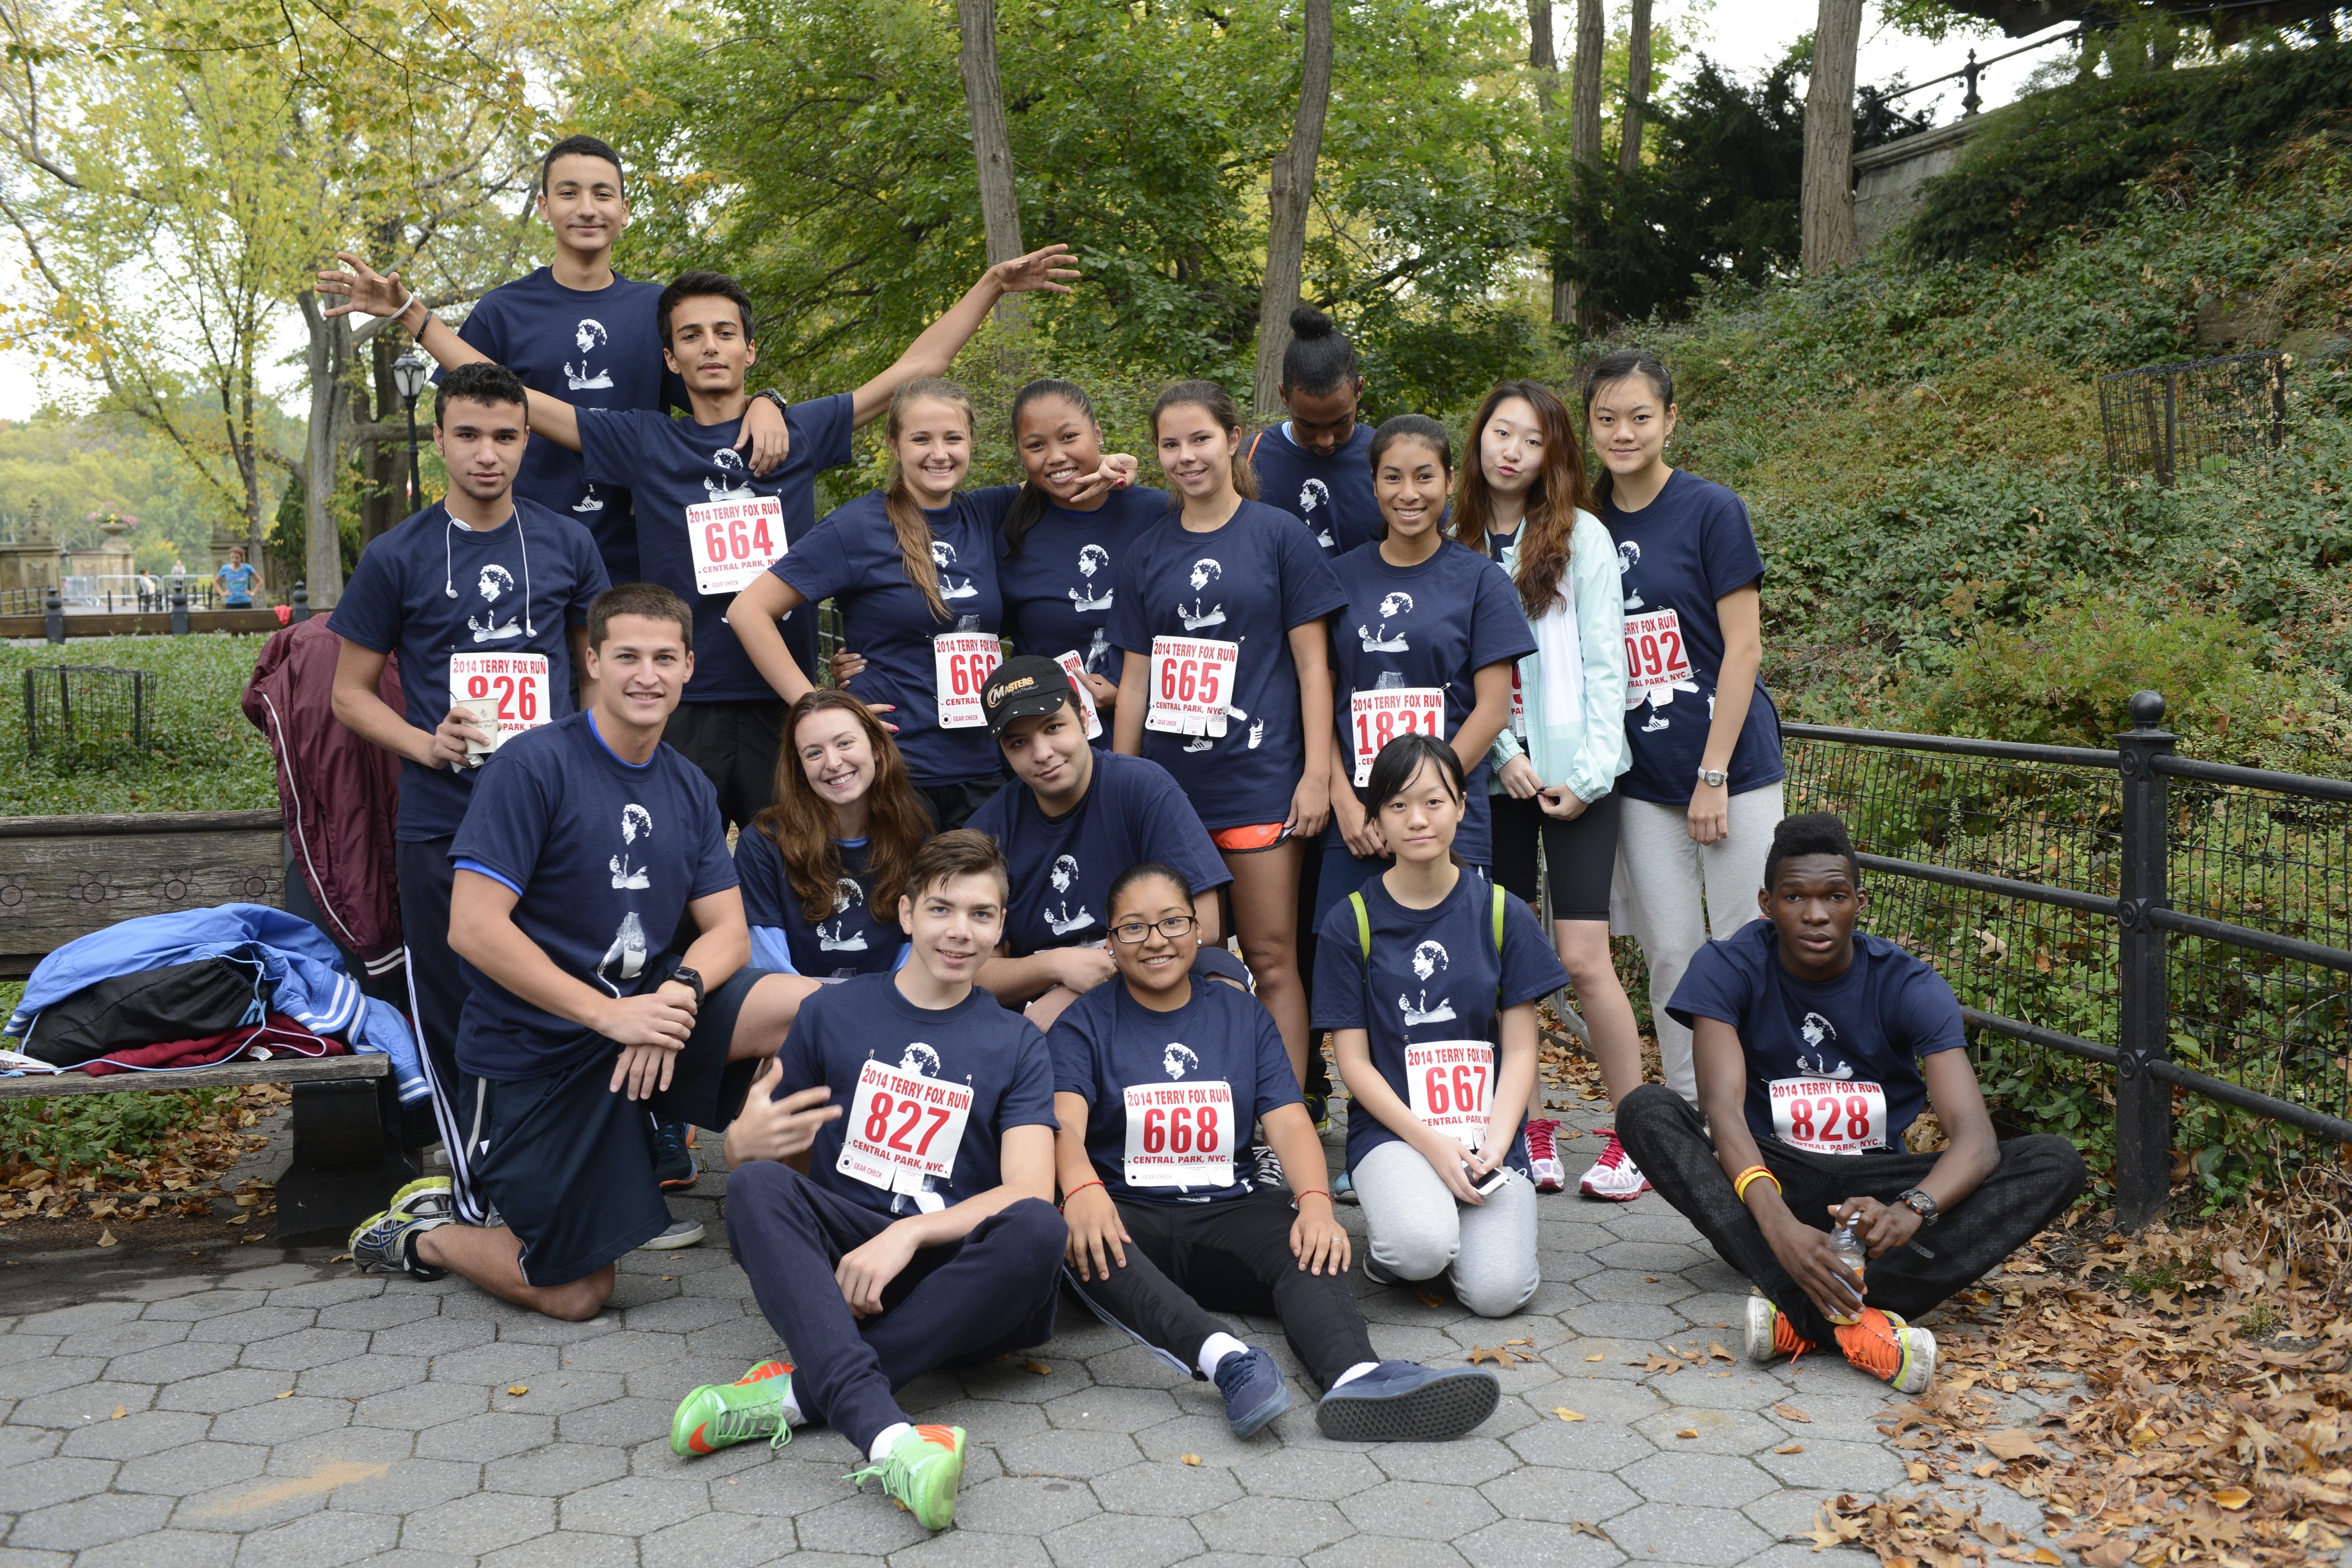 Star Mountain Participating in the Terry Fox Run Charity Event for Cancer Research